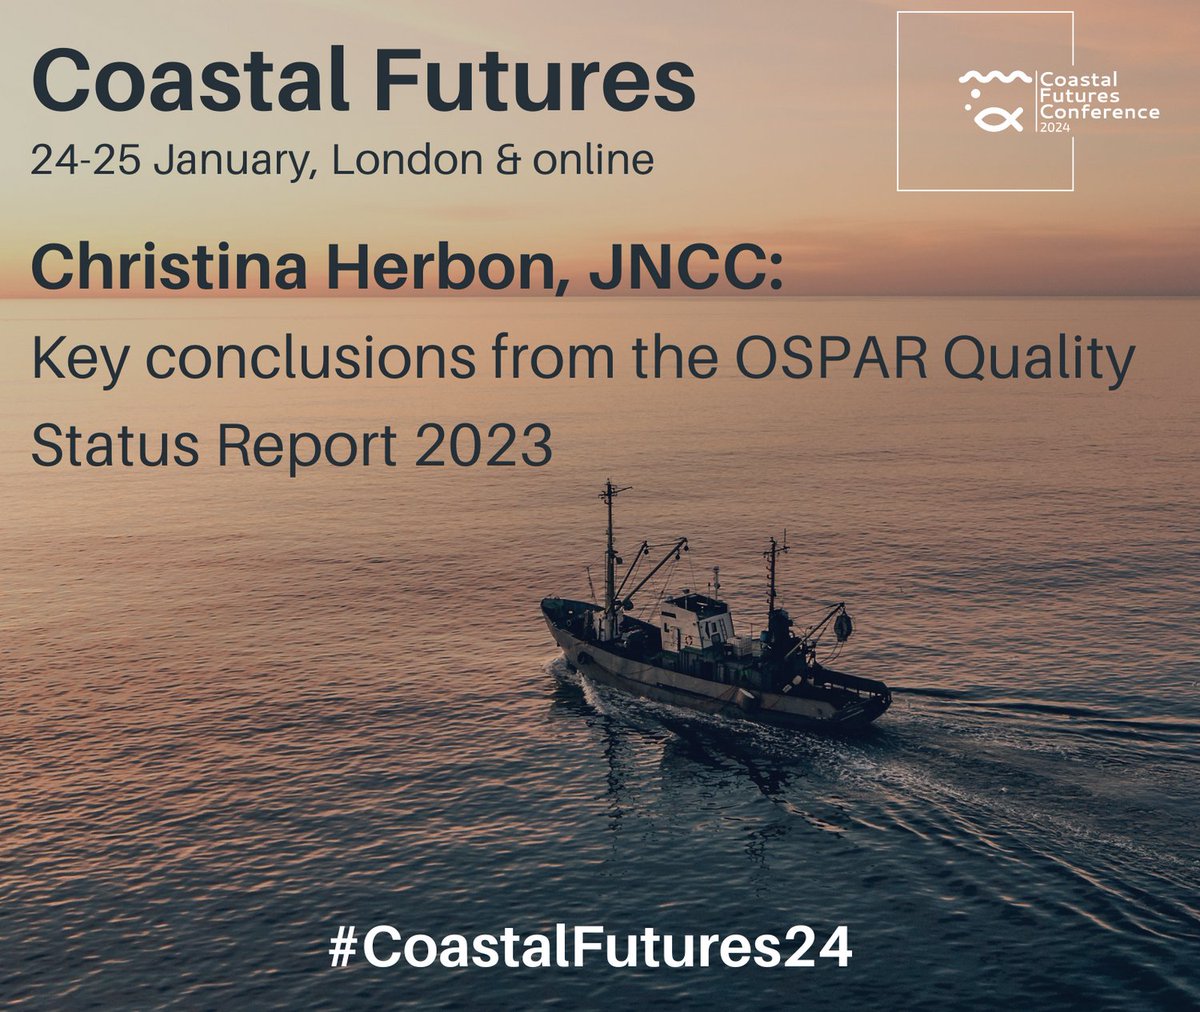 🌊In the #CoastalFutures24 session on Evidence Assessment Into Action will be a talk from Christina Herbon, @cvinaherbon @JNCC_UK about 'Key conclusions from the OSPAR QSR 2023' 🎟️Get your ticket to join online or in London 👉site.corsizio.com/c/64f747394cd9… and see the live Q&A too